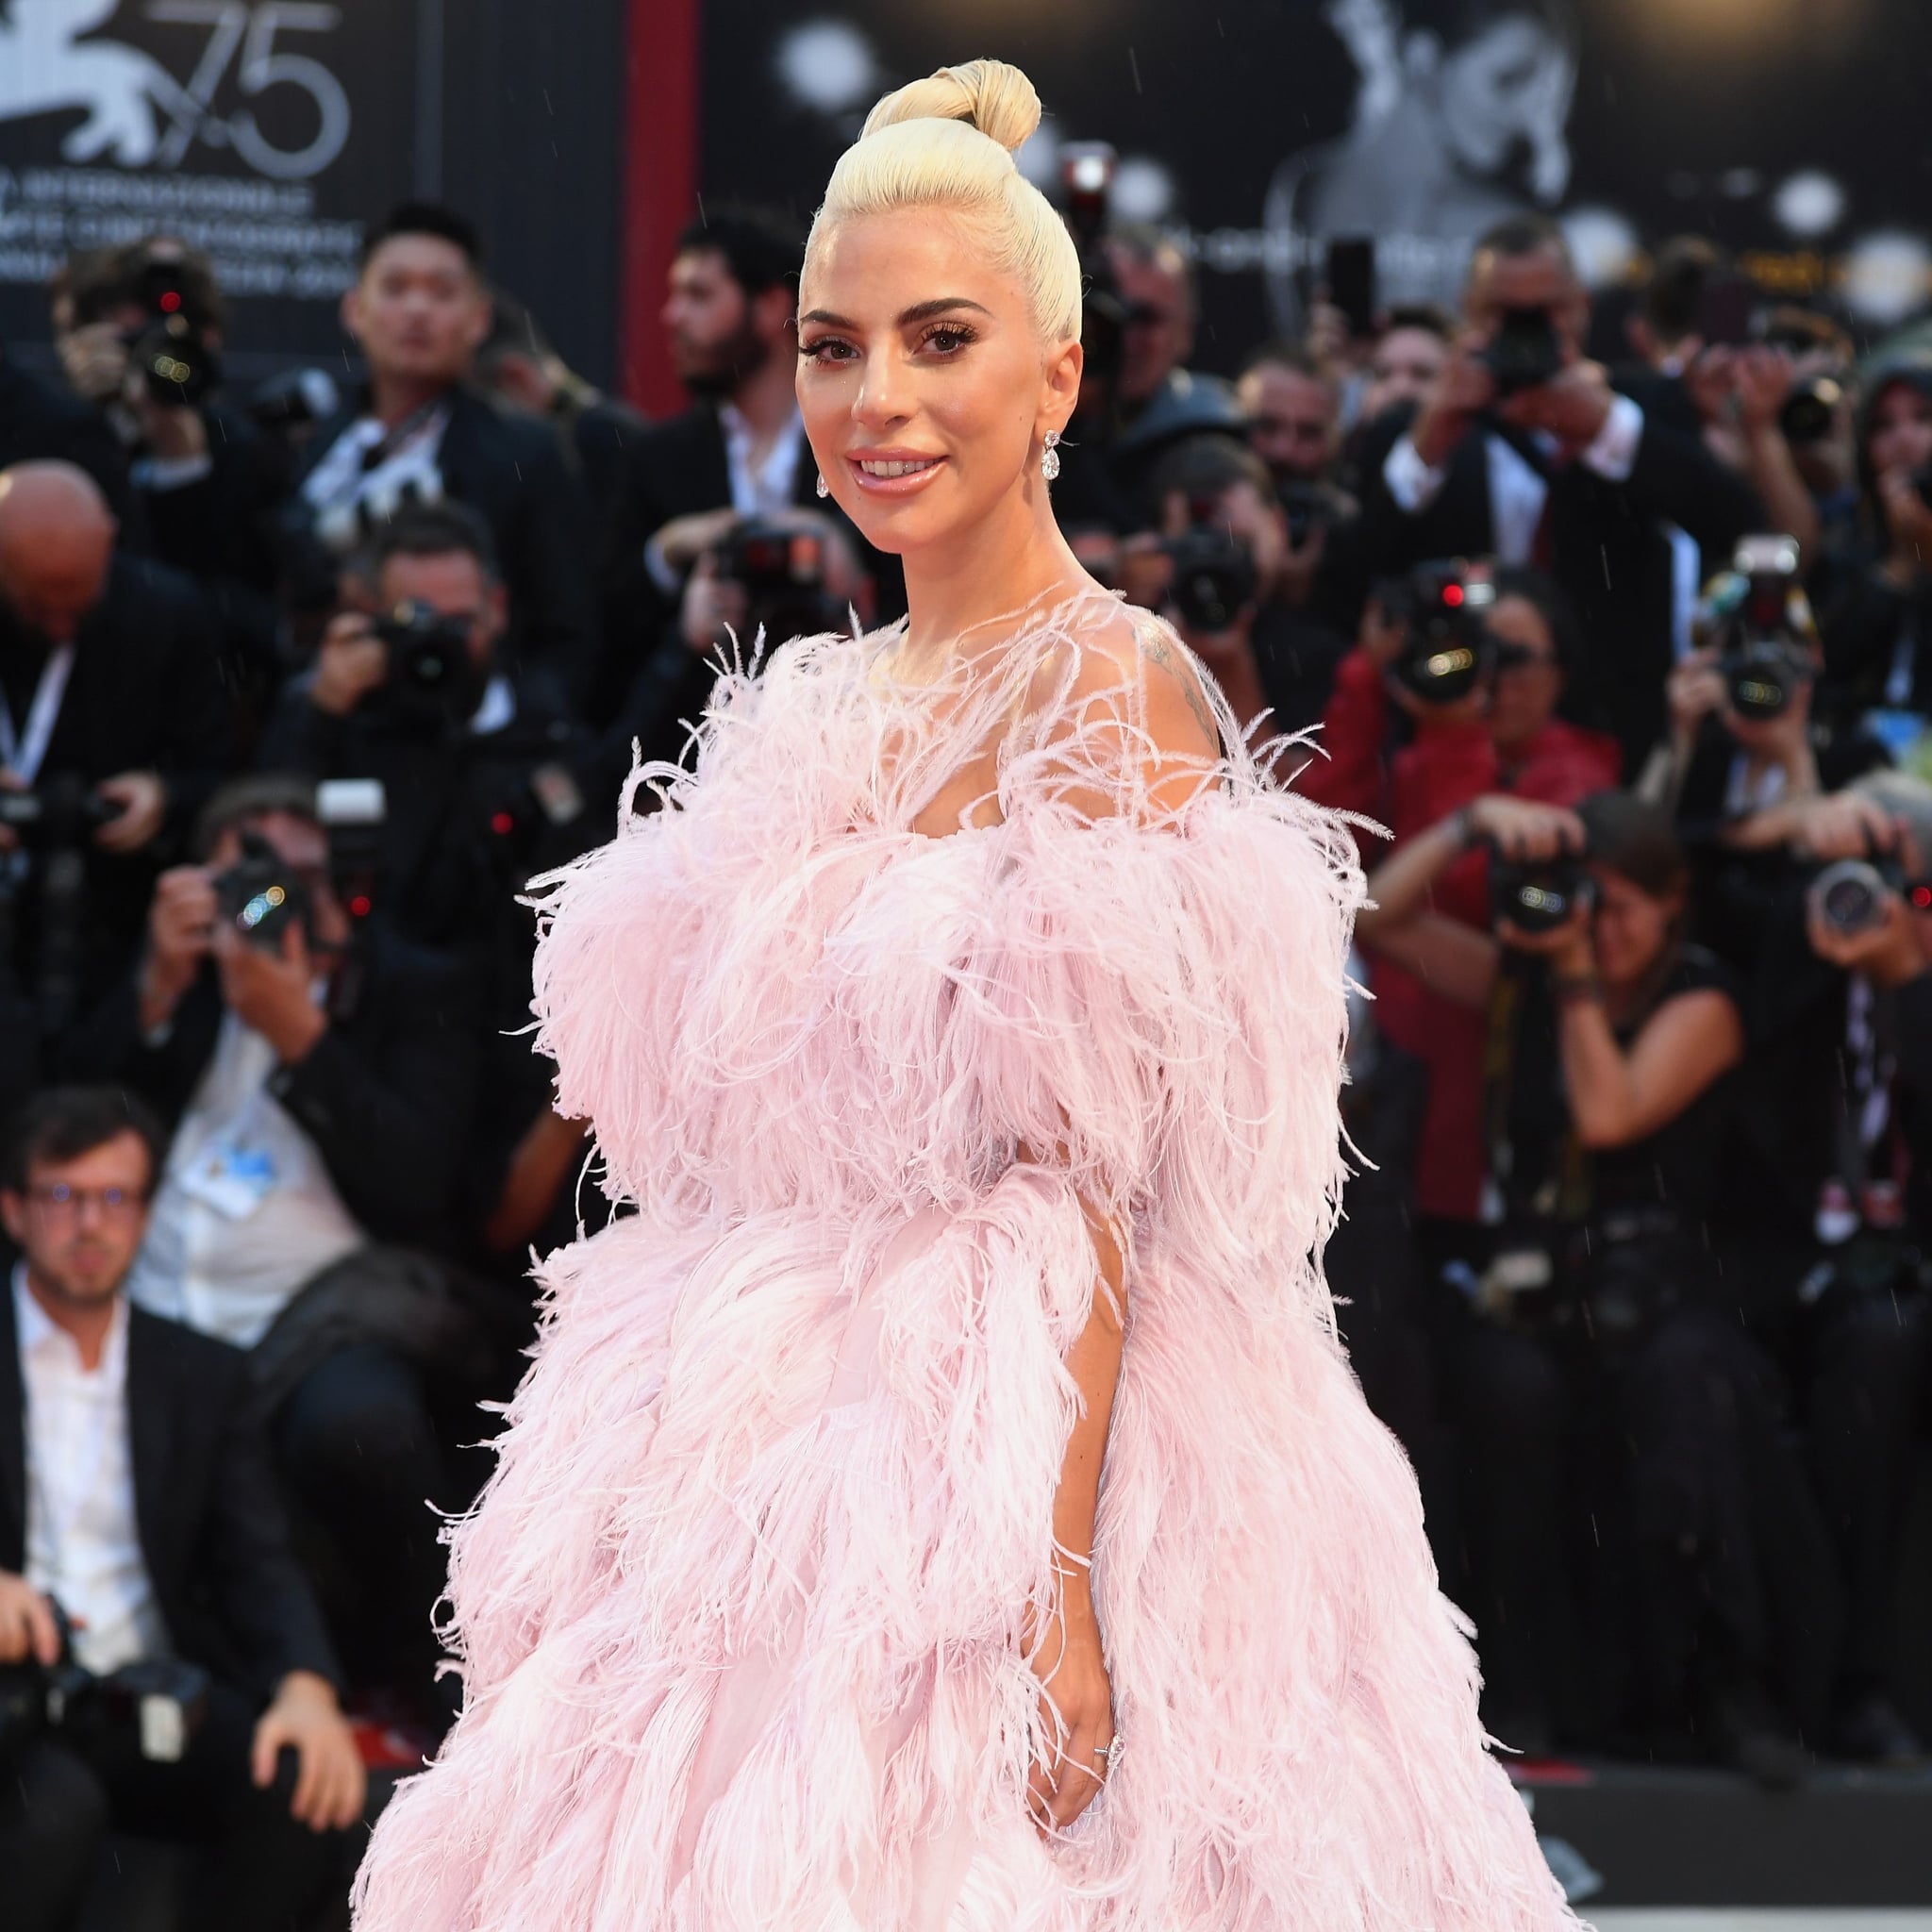 Katy Perry, Lady Gaga, Beyonce: Hottest Red Carpet Moments 3